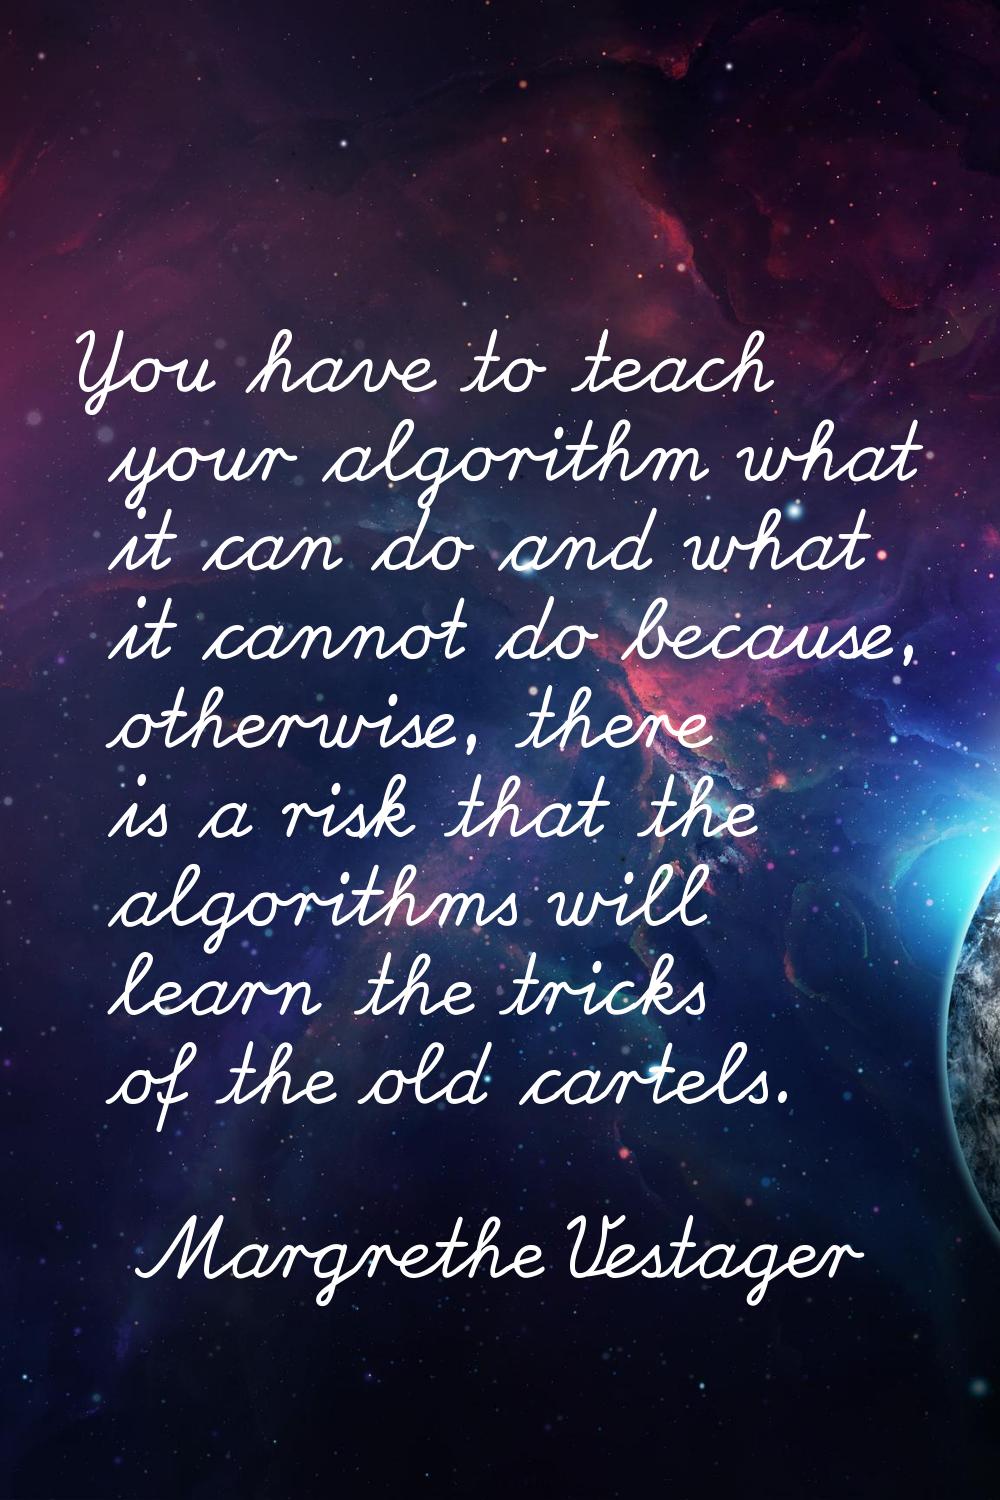 You have to teach your algorithm what it can do and what it cannot do because, otherwise, there is 